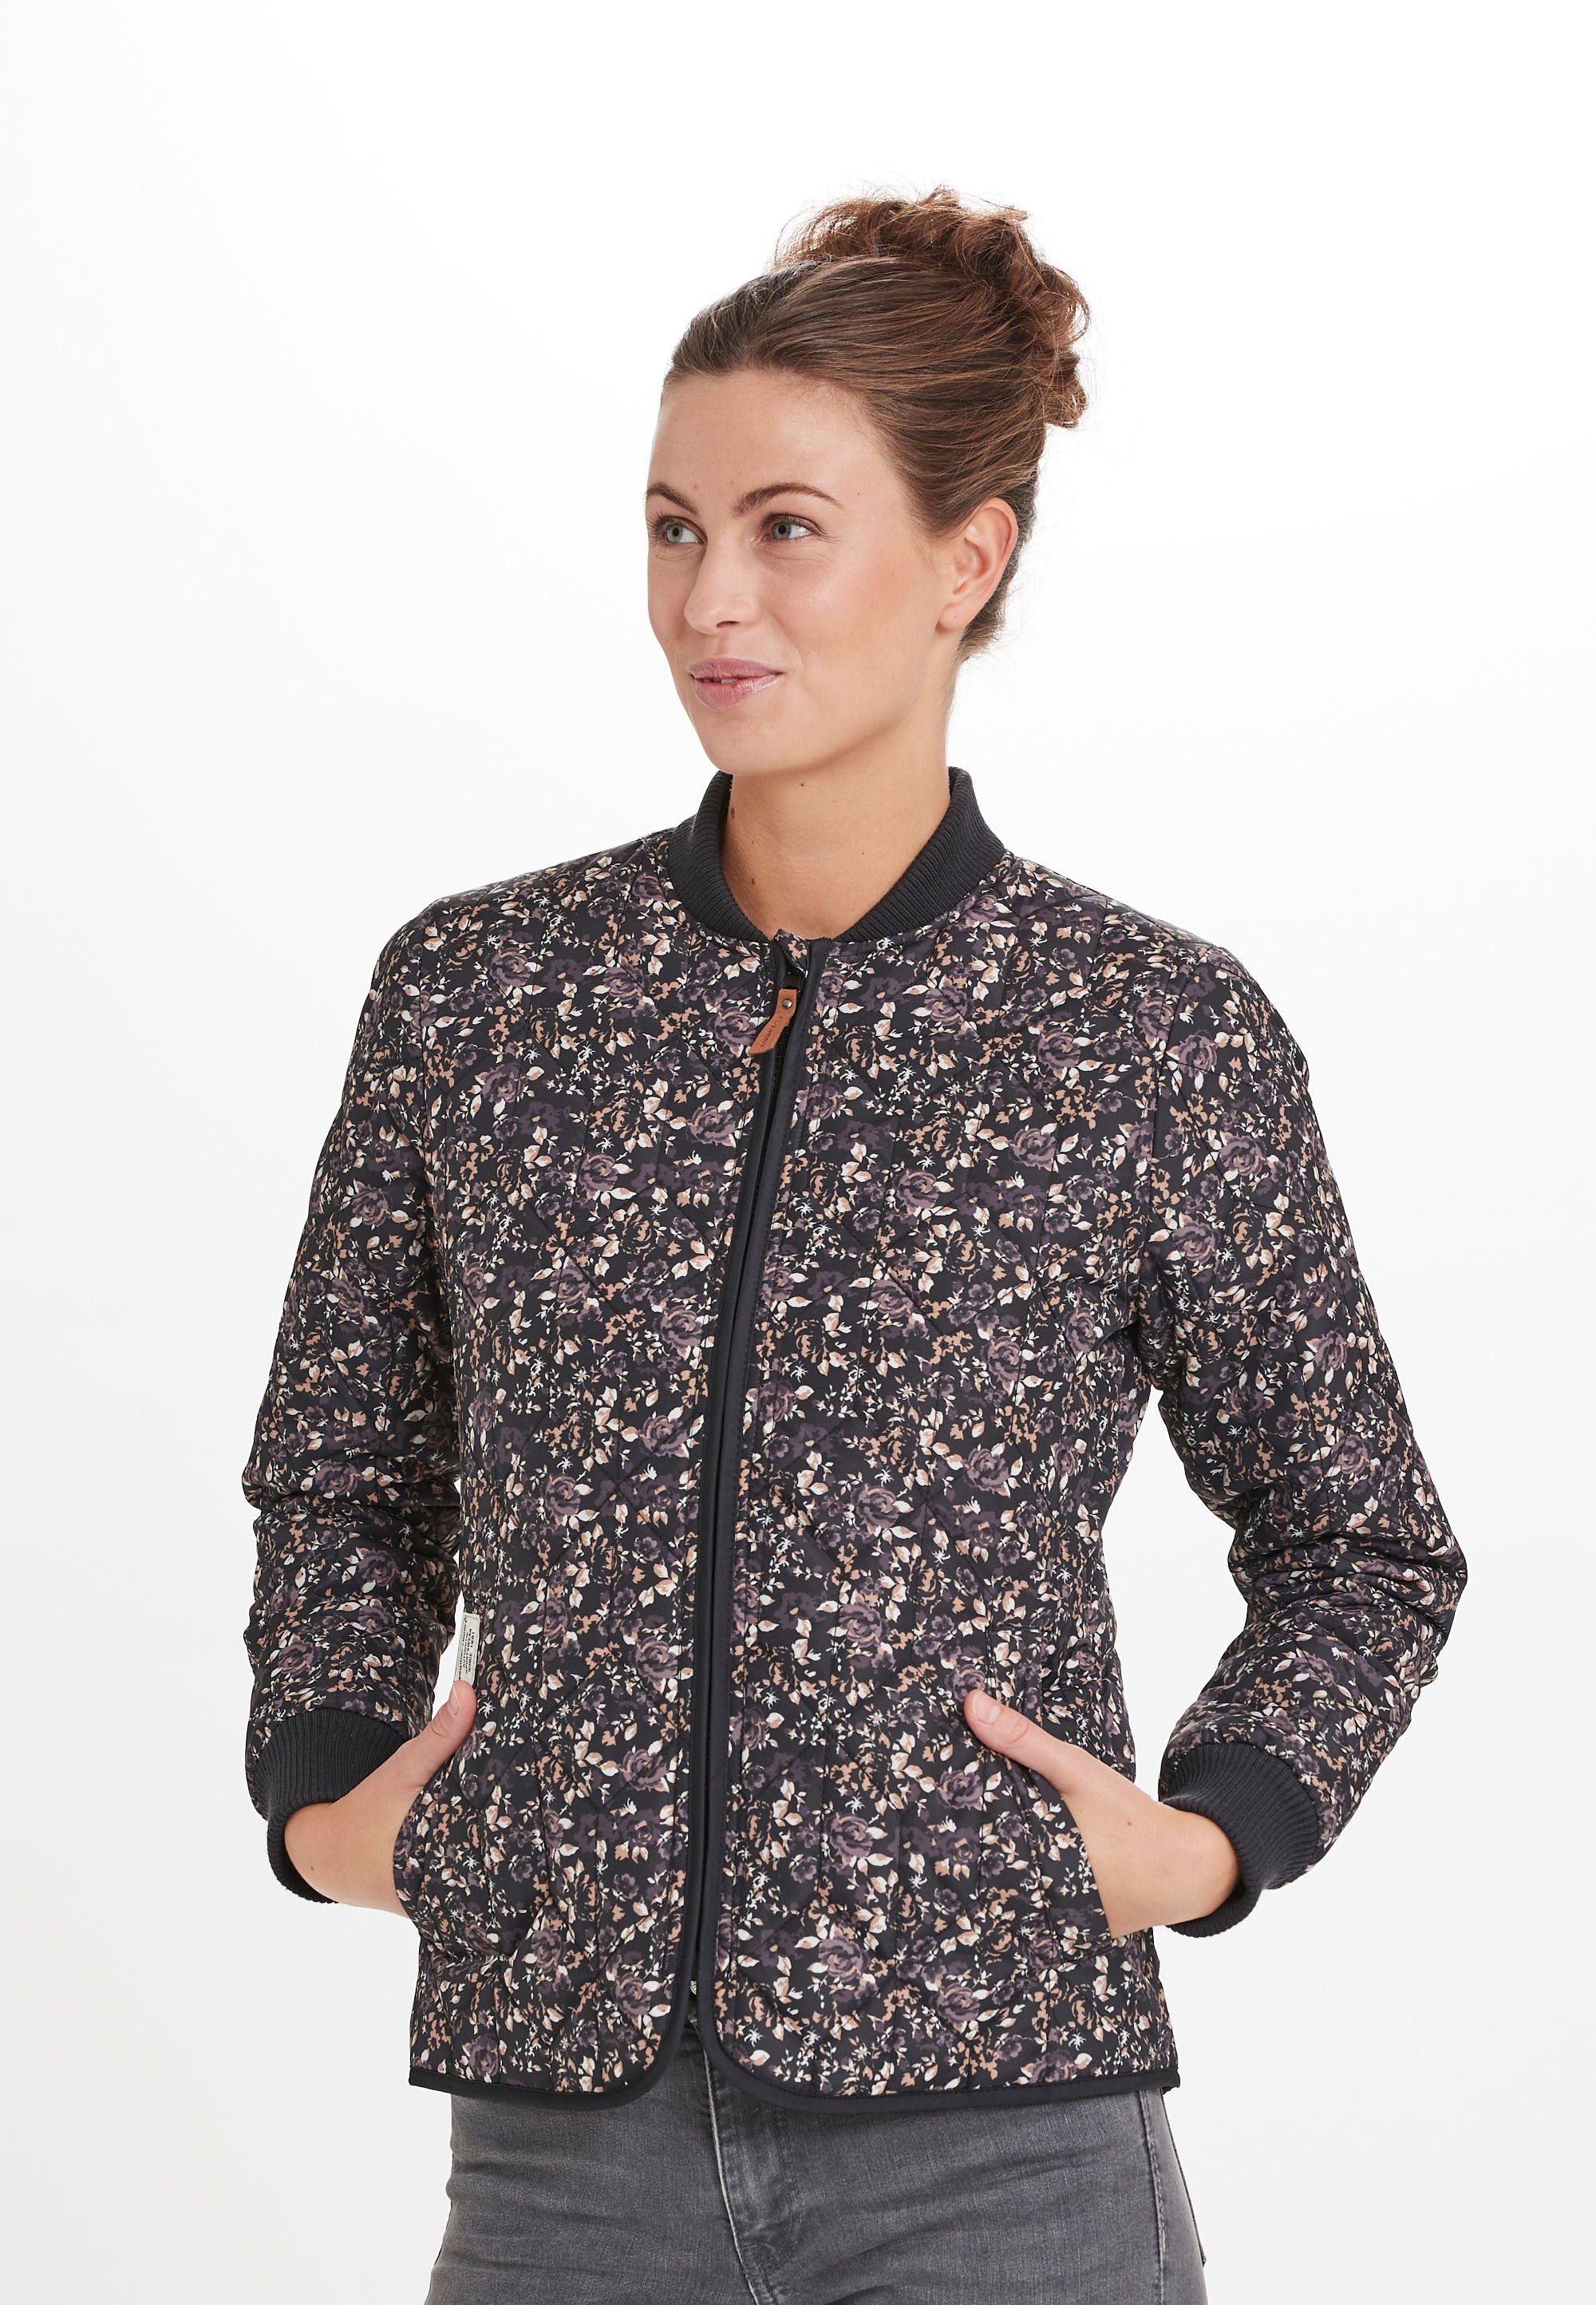 WEATHER REPORT Outdoorjacke »Floral«, floralem online Allover-Muster mit